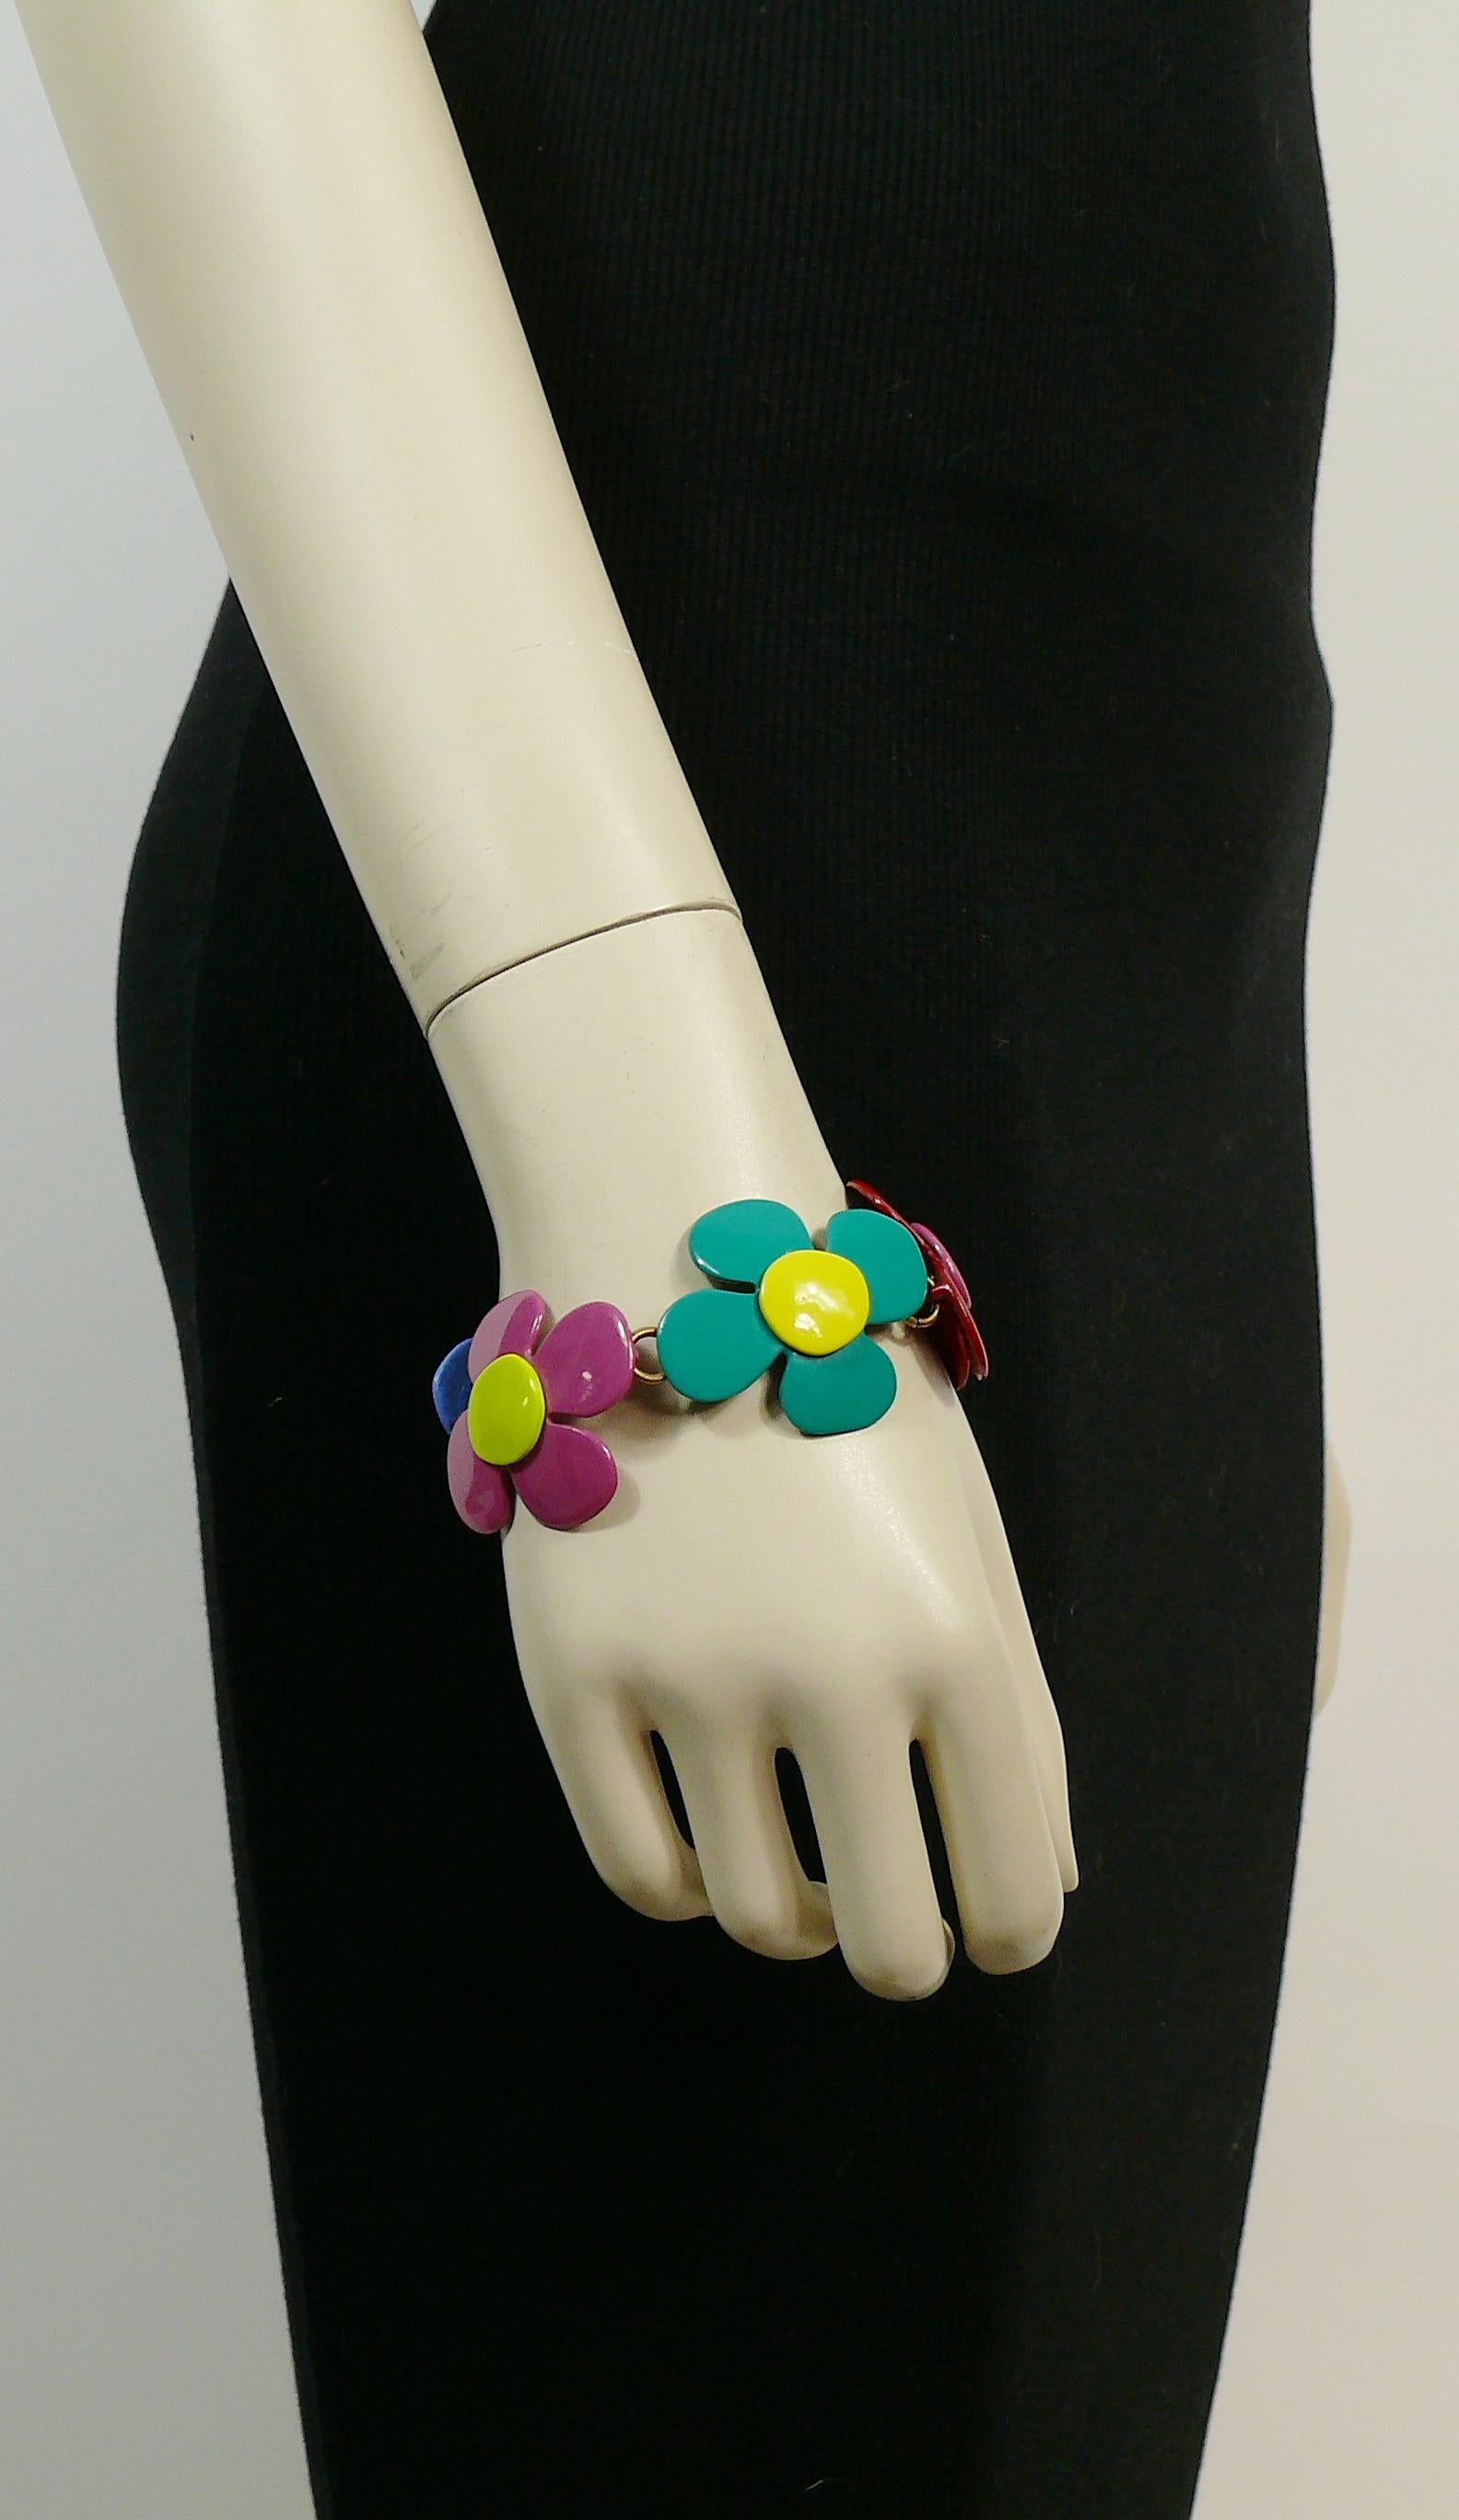 YVES SAINT LAURENT vintage flower power enamel bracelet.

Embossed YSL Made in France and YVES SAINT LAURENT on the love heart clasp.

Indicative measurements : adjustable length from approx. 19.5 cm (7.68 inches) to approx. 22 cm (8.66 inches) /